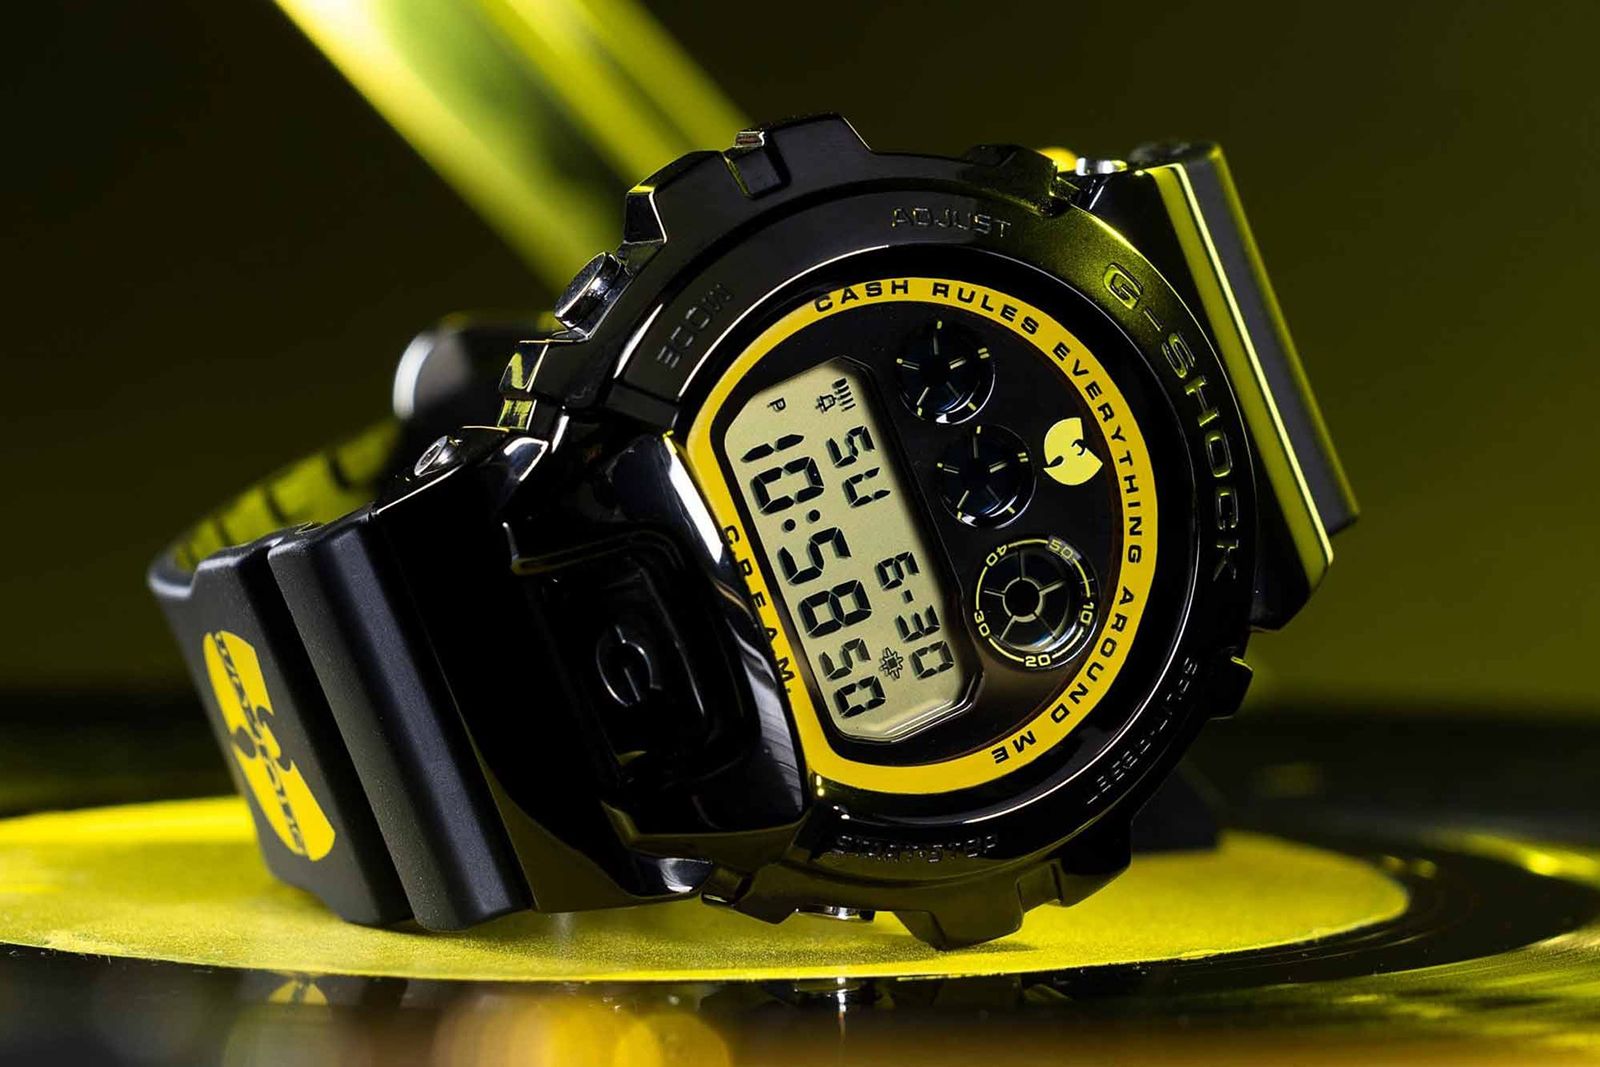 Wu-Tang G-Shock 6900 front and on side